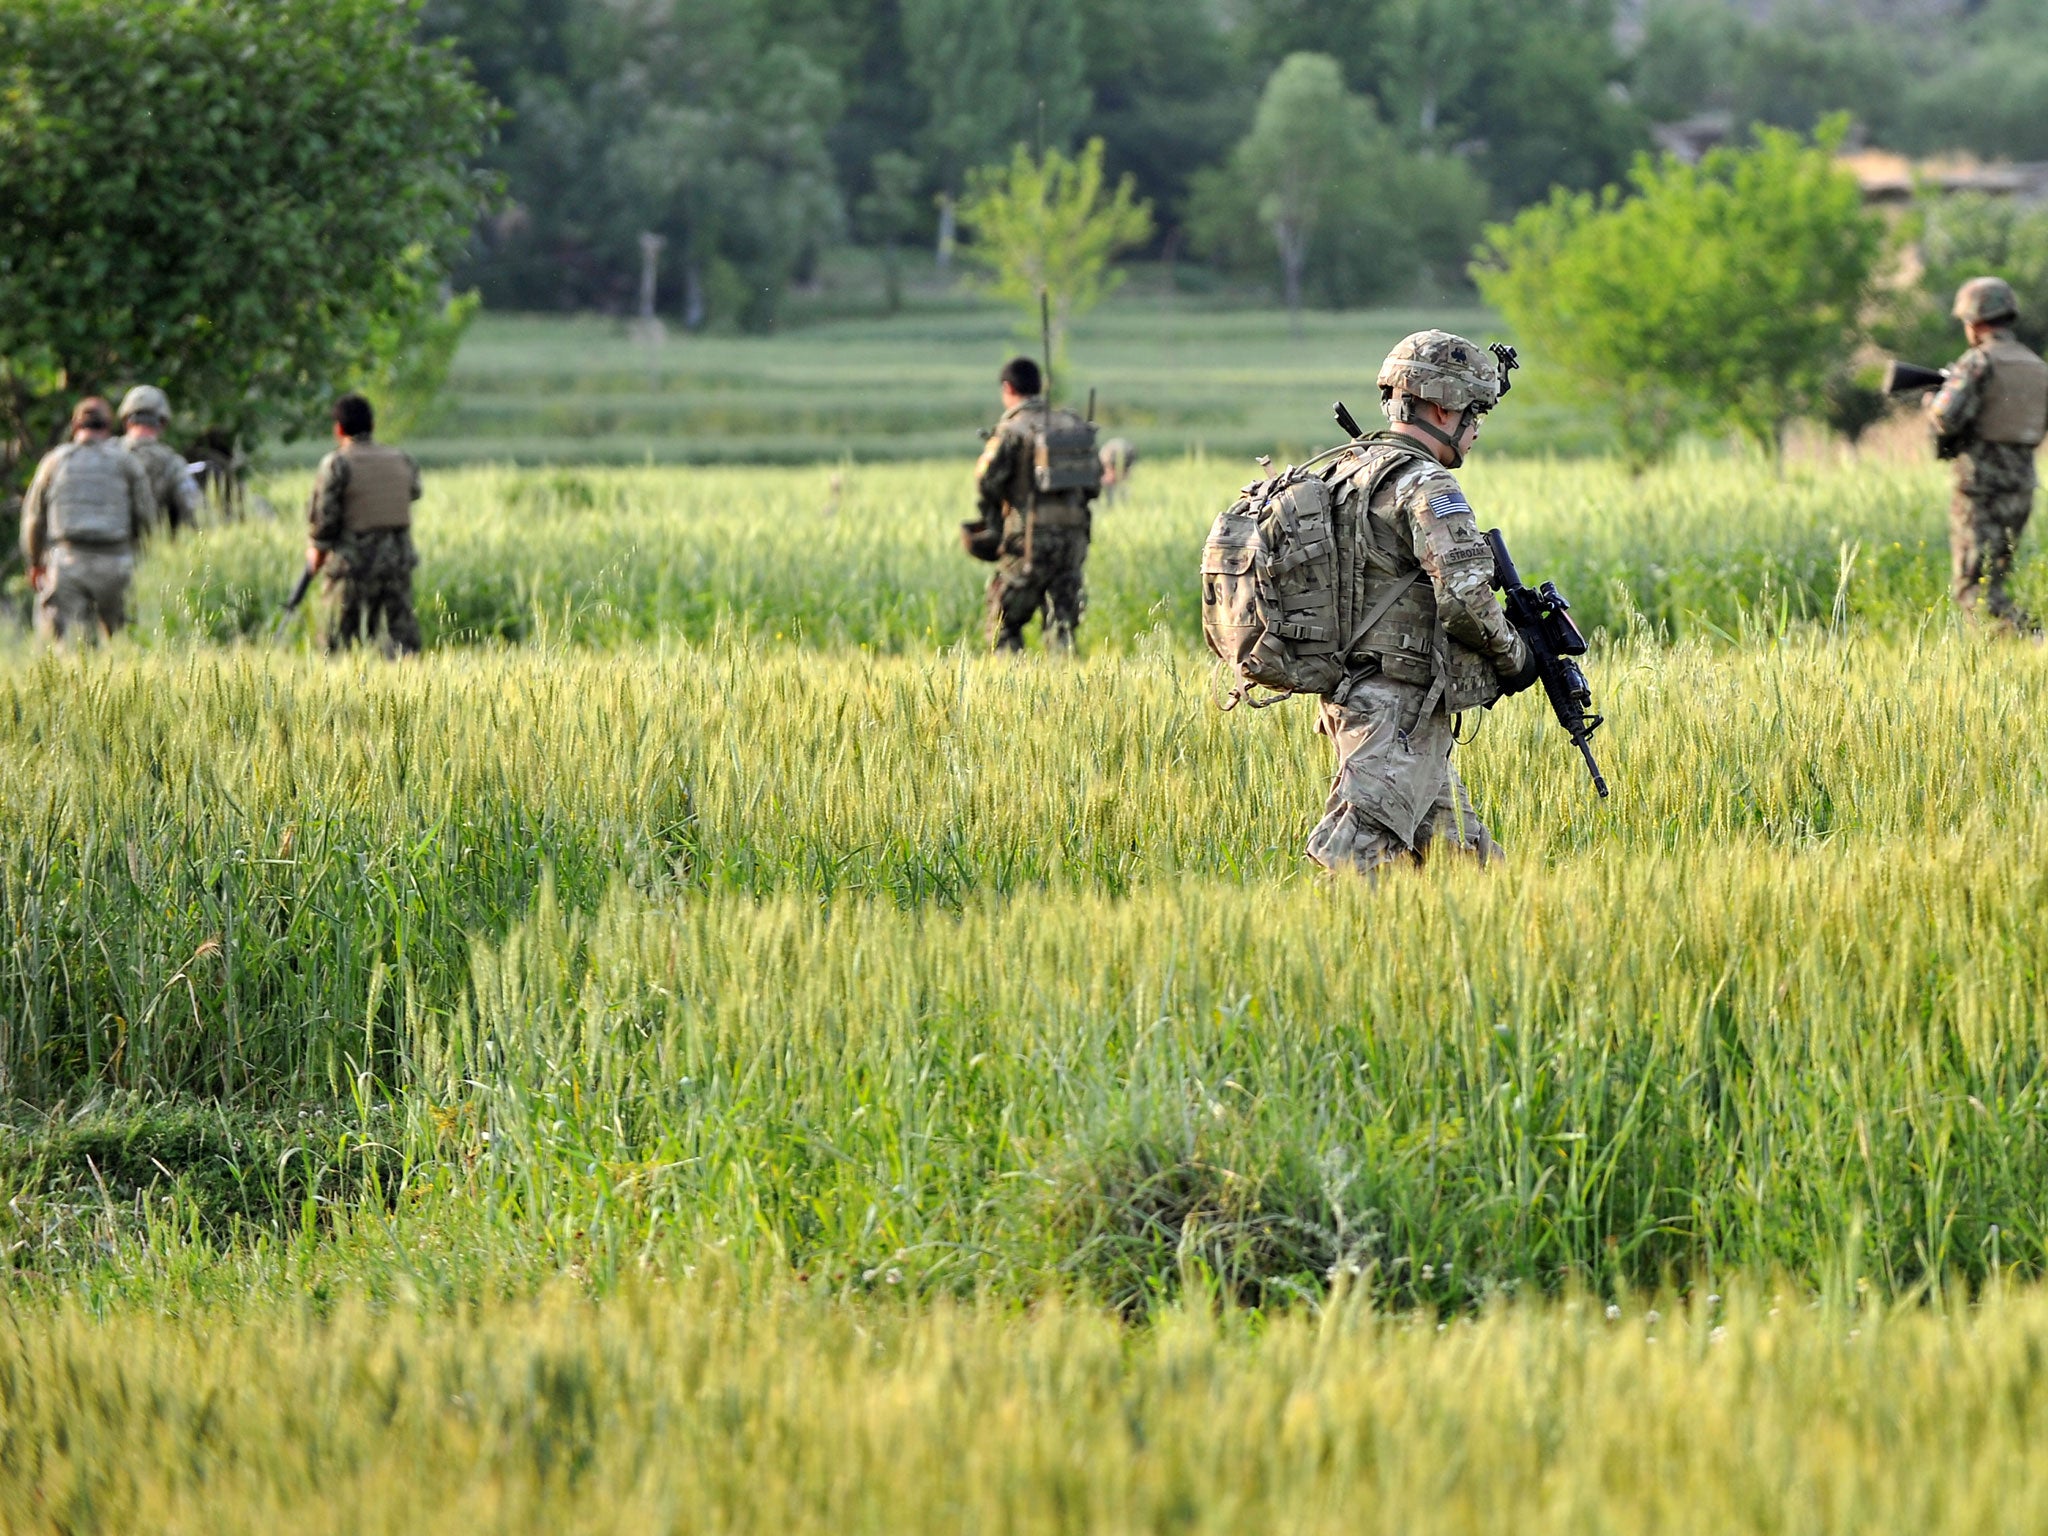 US army soldiers along with the soldiers of Afghan National Army (ANA) march through Watahpur District in Kunar province